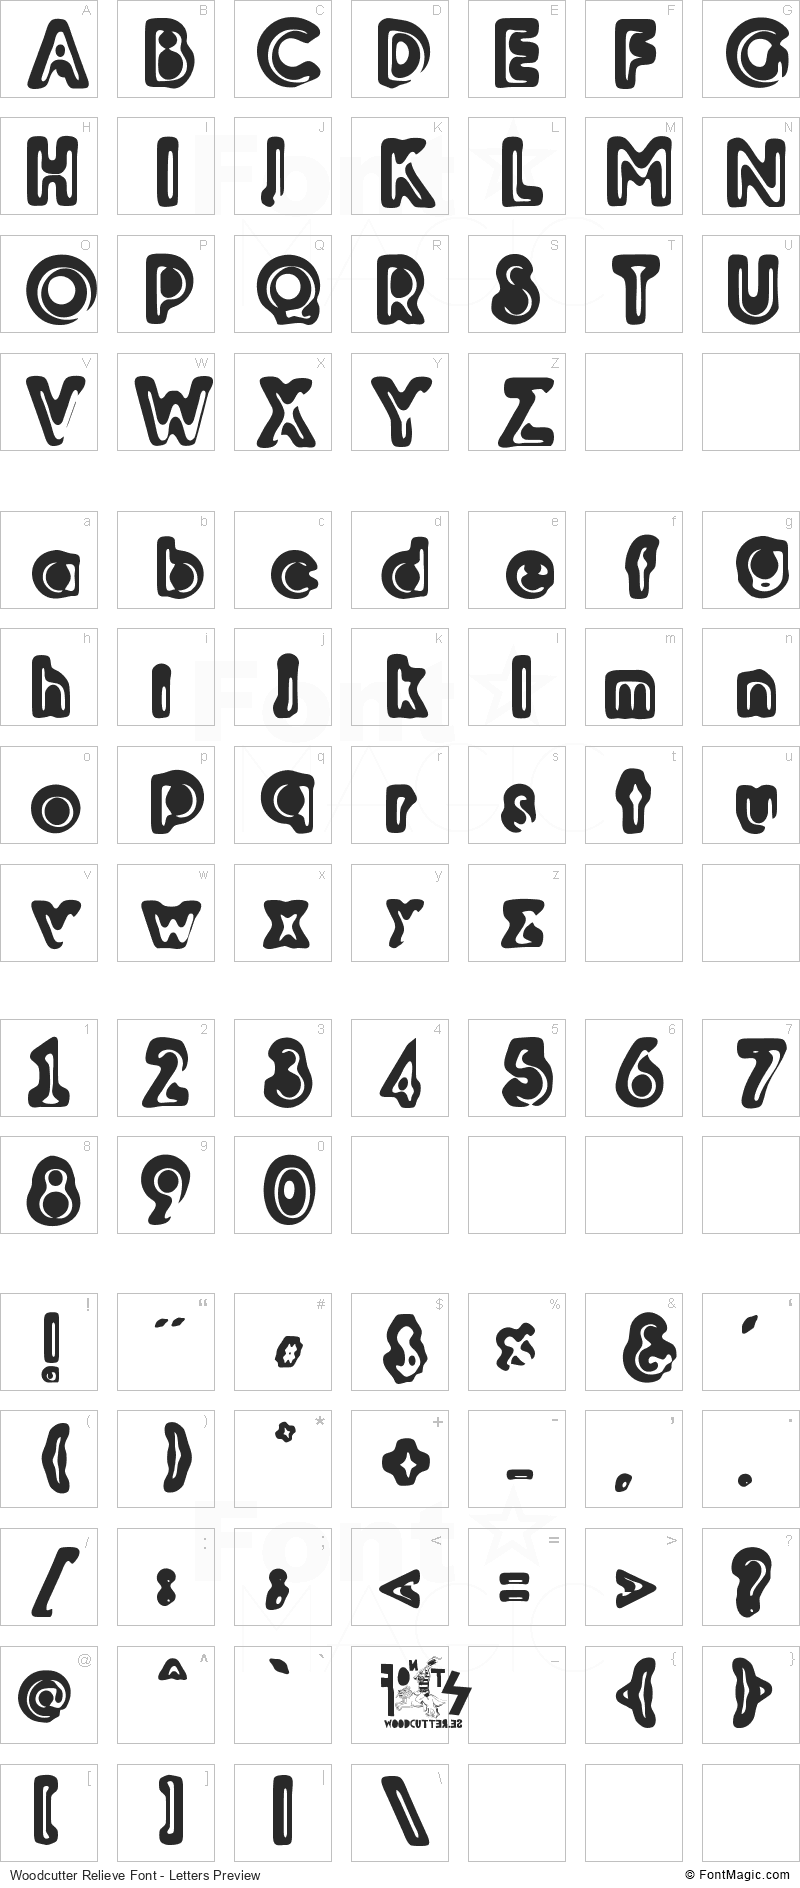 Woodcutter Relieve Font - All Latters Preview Chart